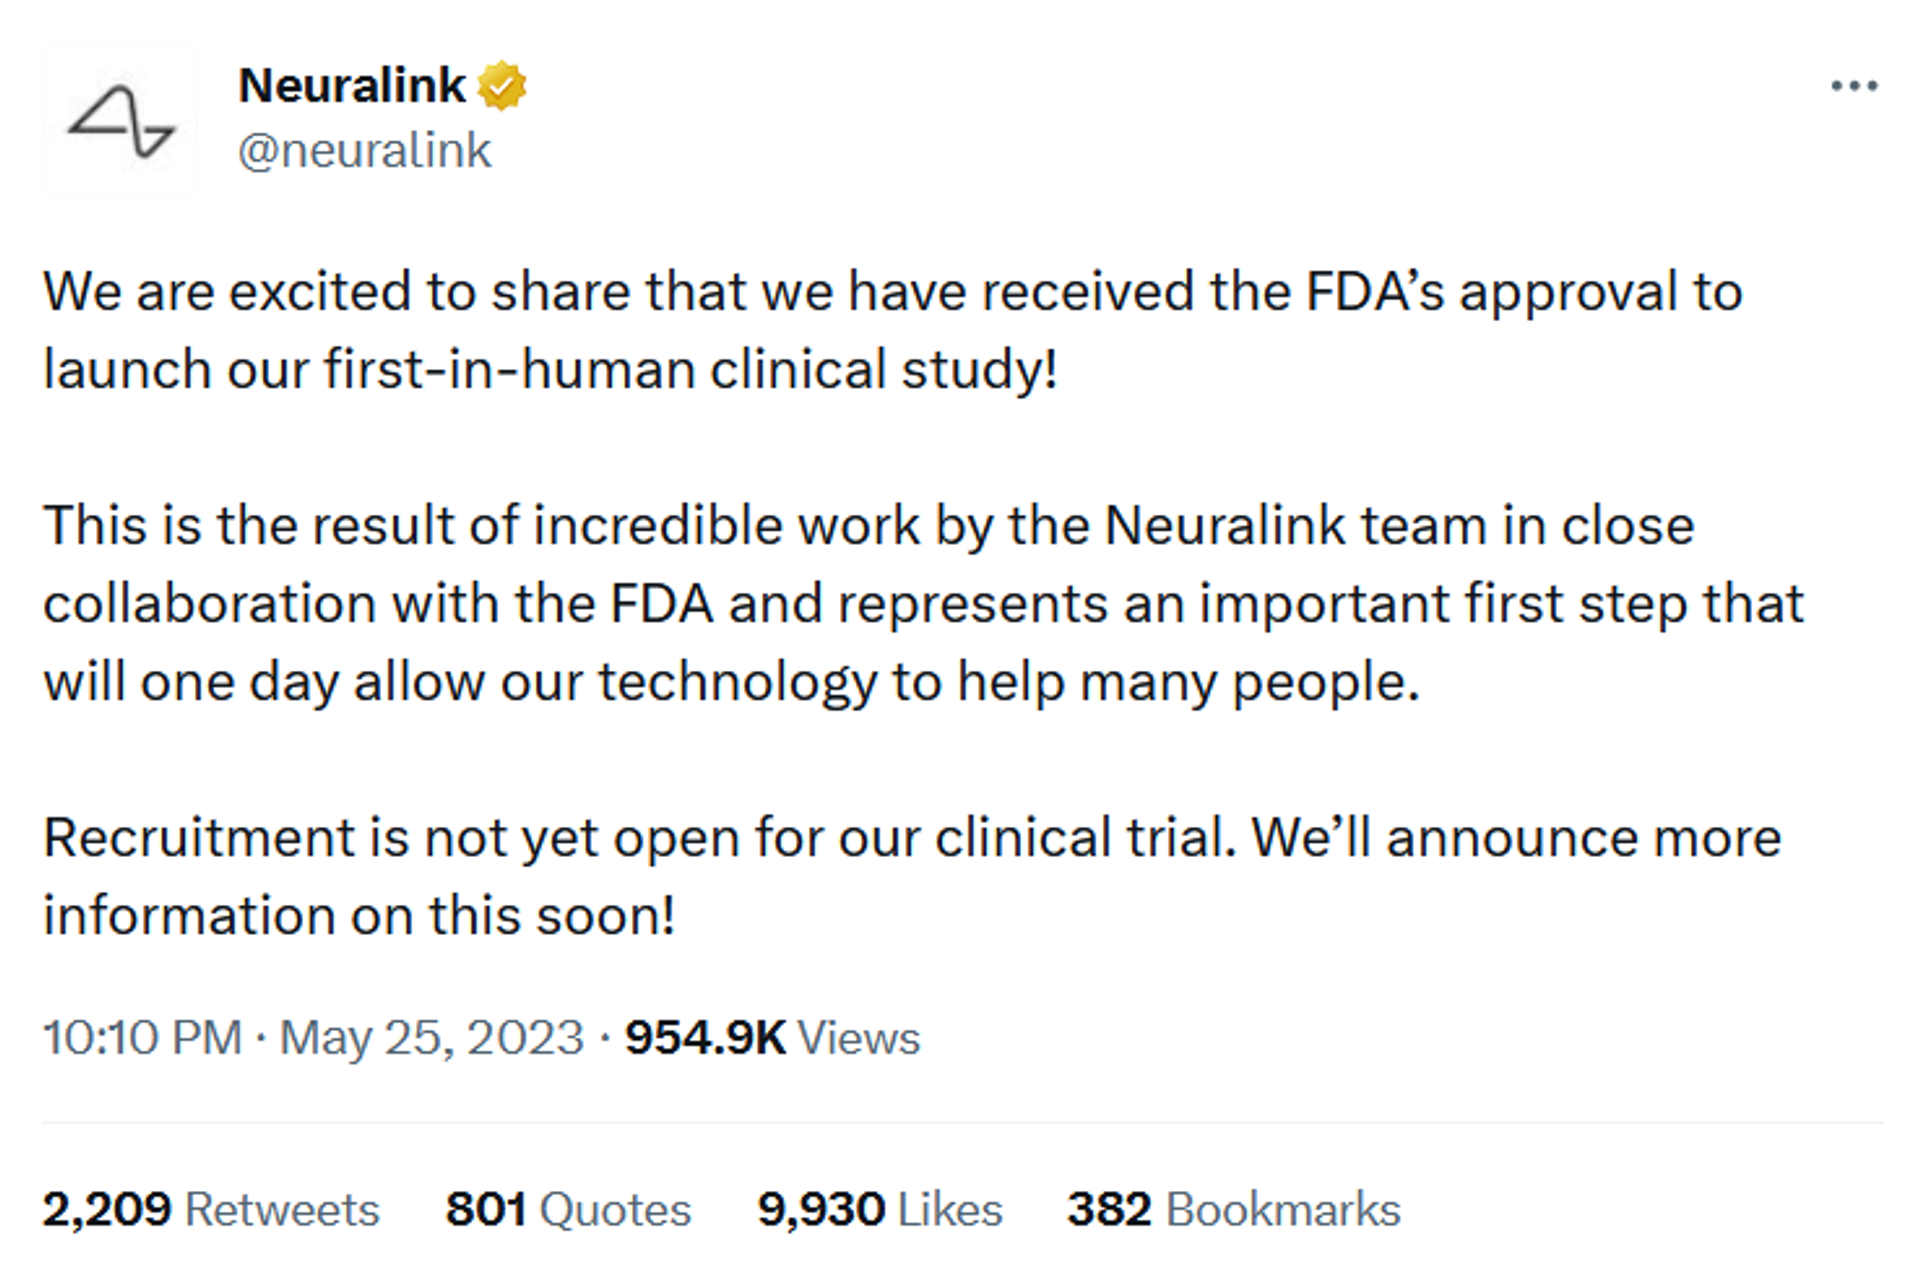 Message from the official Neuralink account on receipt of approval from the FDA. - Sputnik International, 1920, 26.05.2023